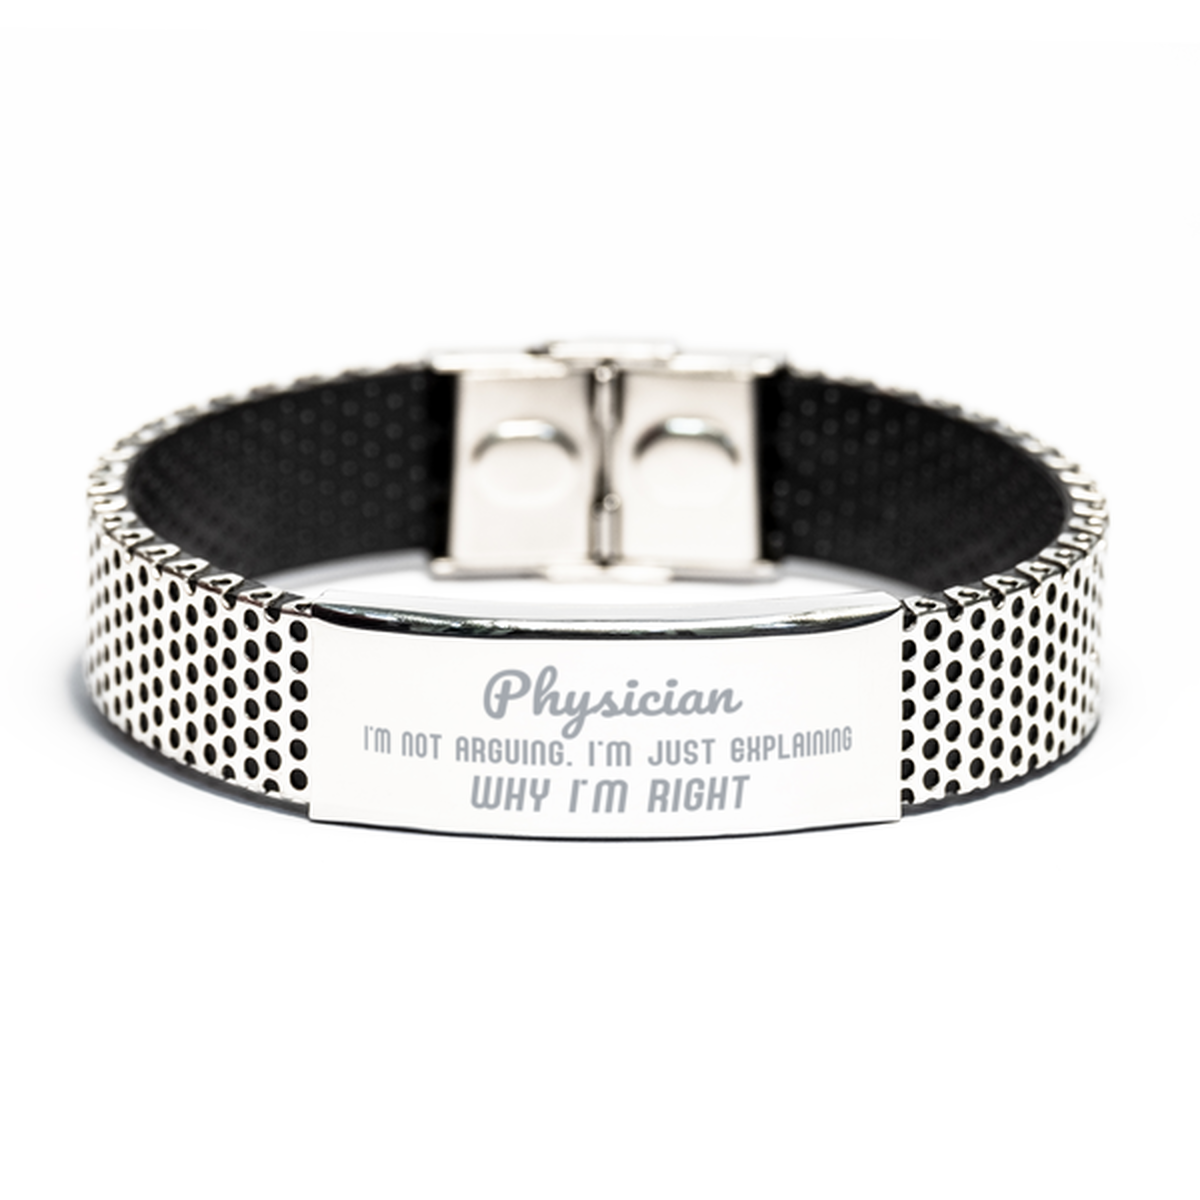 Physician I'm not Arguing. I'm Just Explaining Why I'm RIGHT Stainless Steel Bracelet, Funny Saying Quote Physician Gifts For Physician Graduation Birthday Christmas Gifts for Men Women Coworker